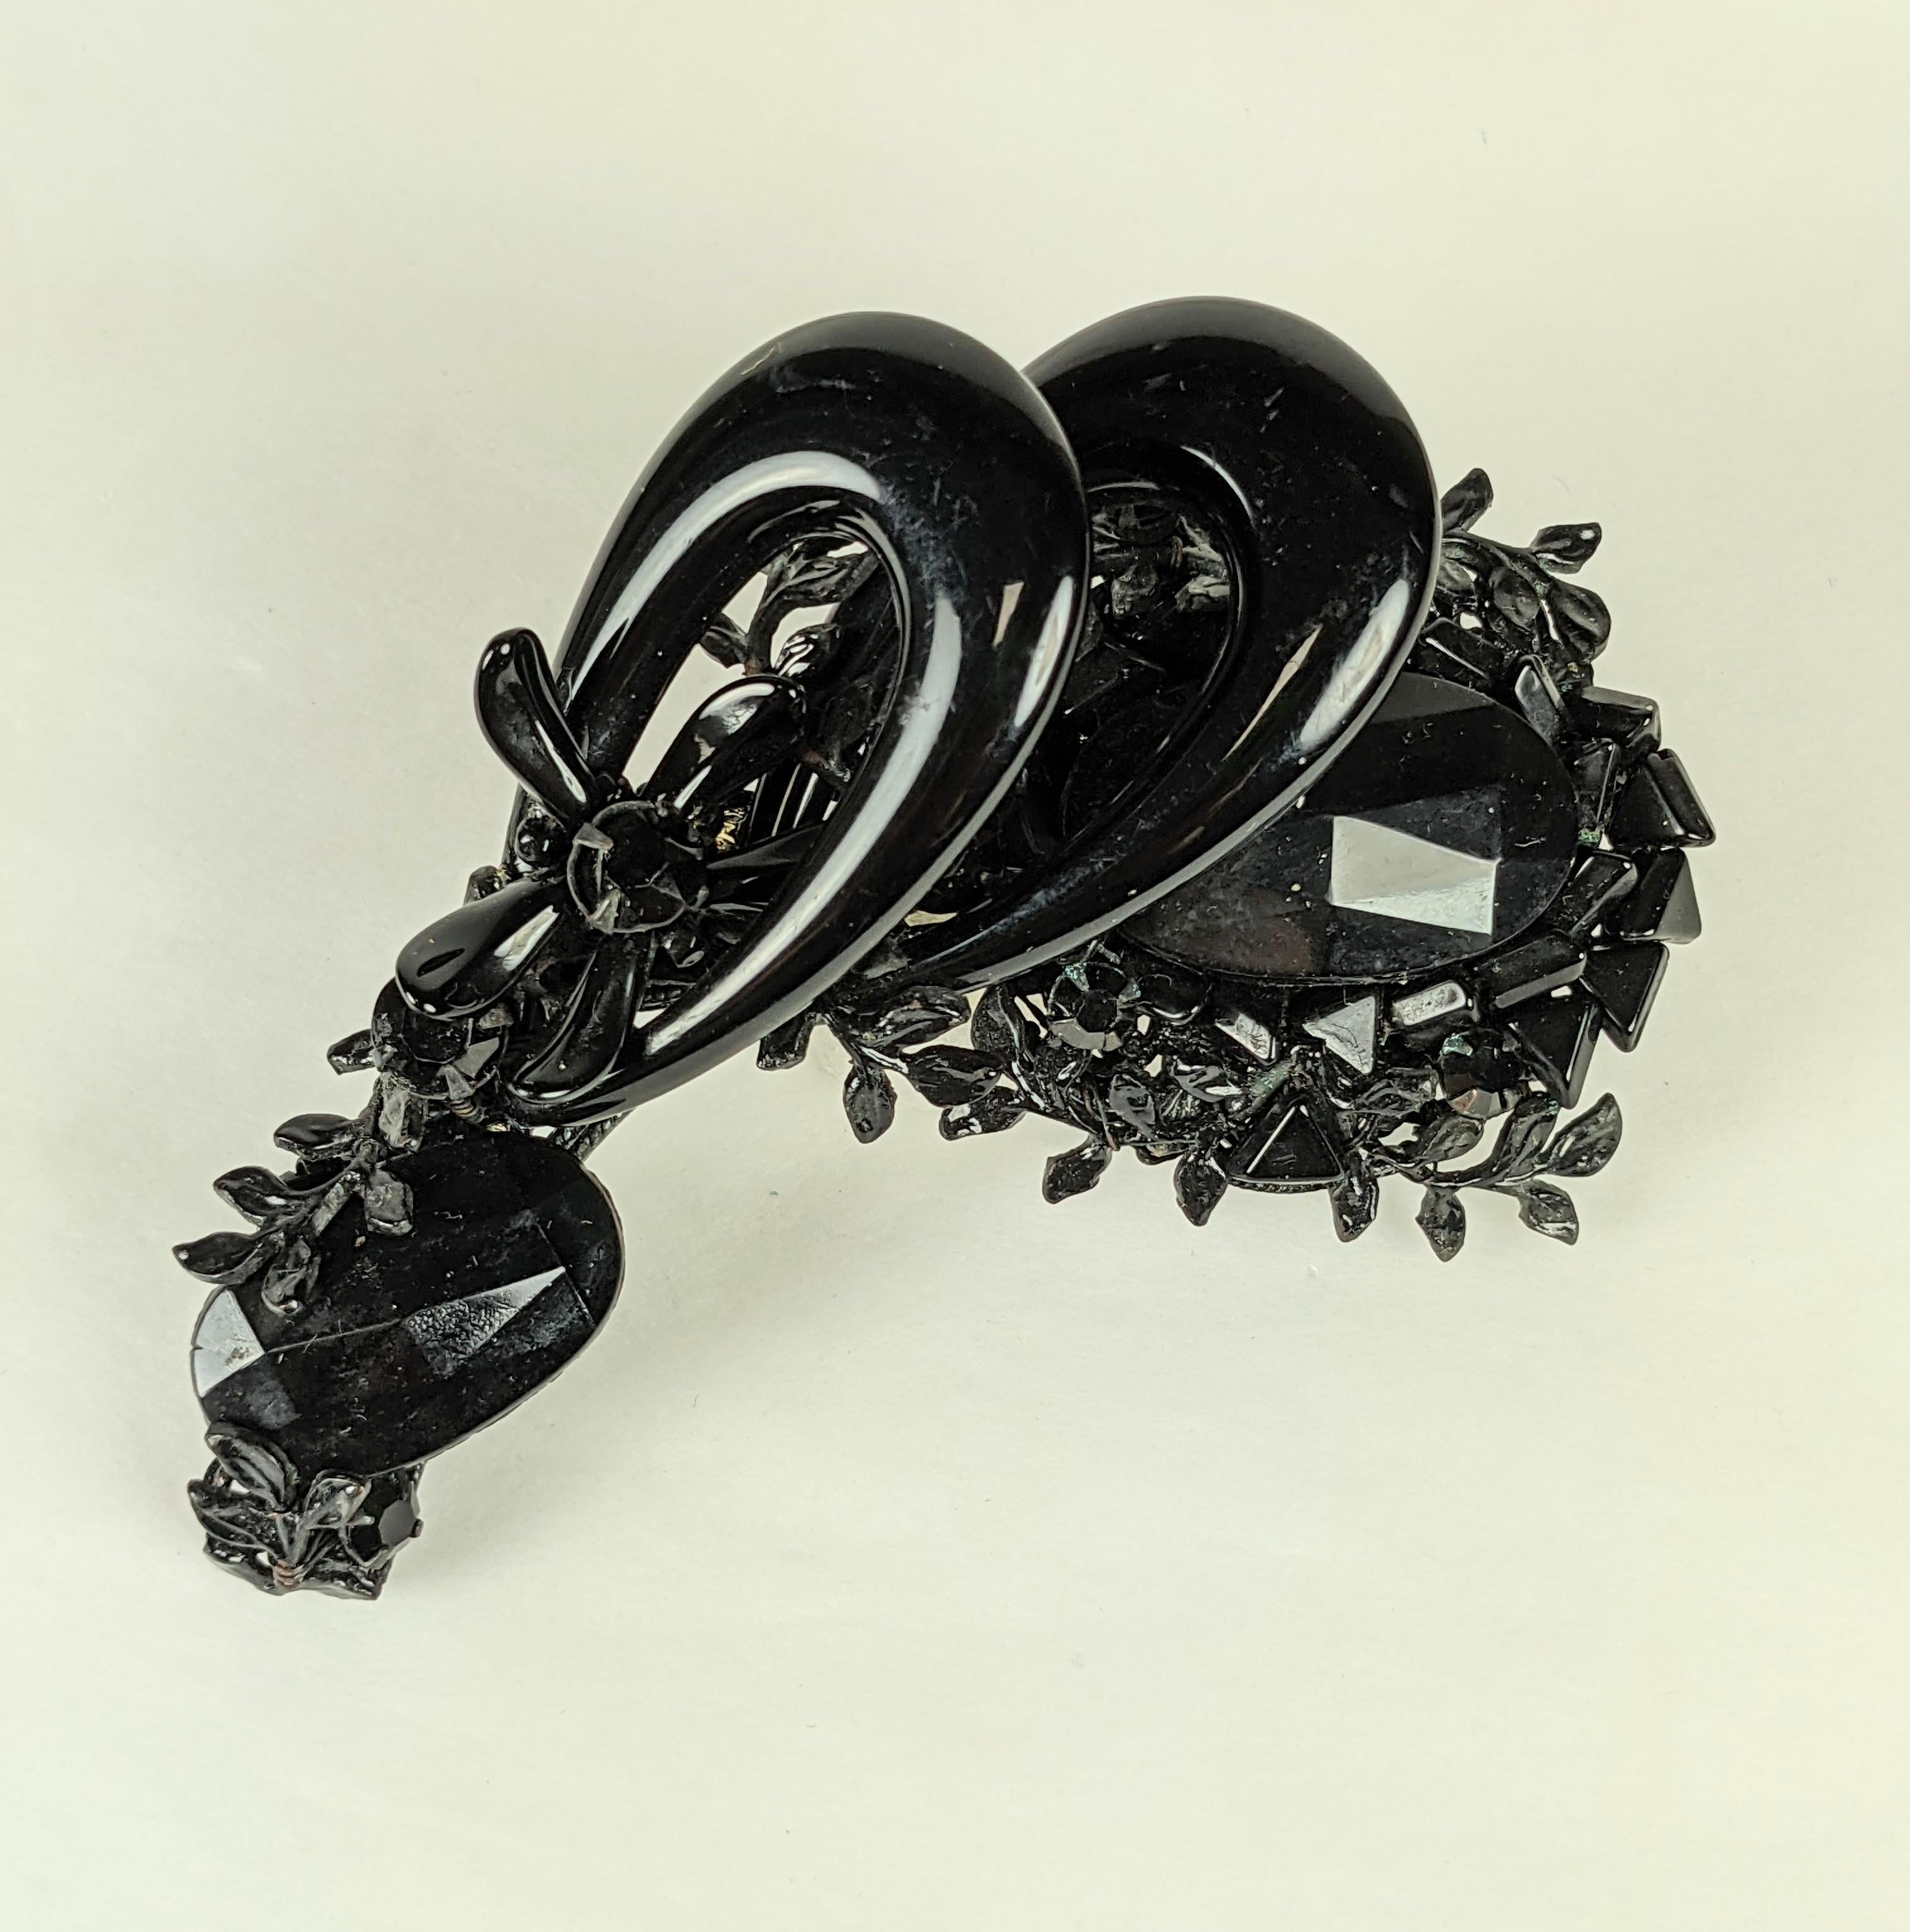 Stunning and dimensional Miriam Haskell Jet Loop Brooch from the 1950's. Elaborate jet stones of different cuts are embroidered onto a black filigree base A small jet flower is sewn growing out of a black glass loop.
Completely hand made. Signed.